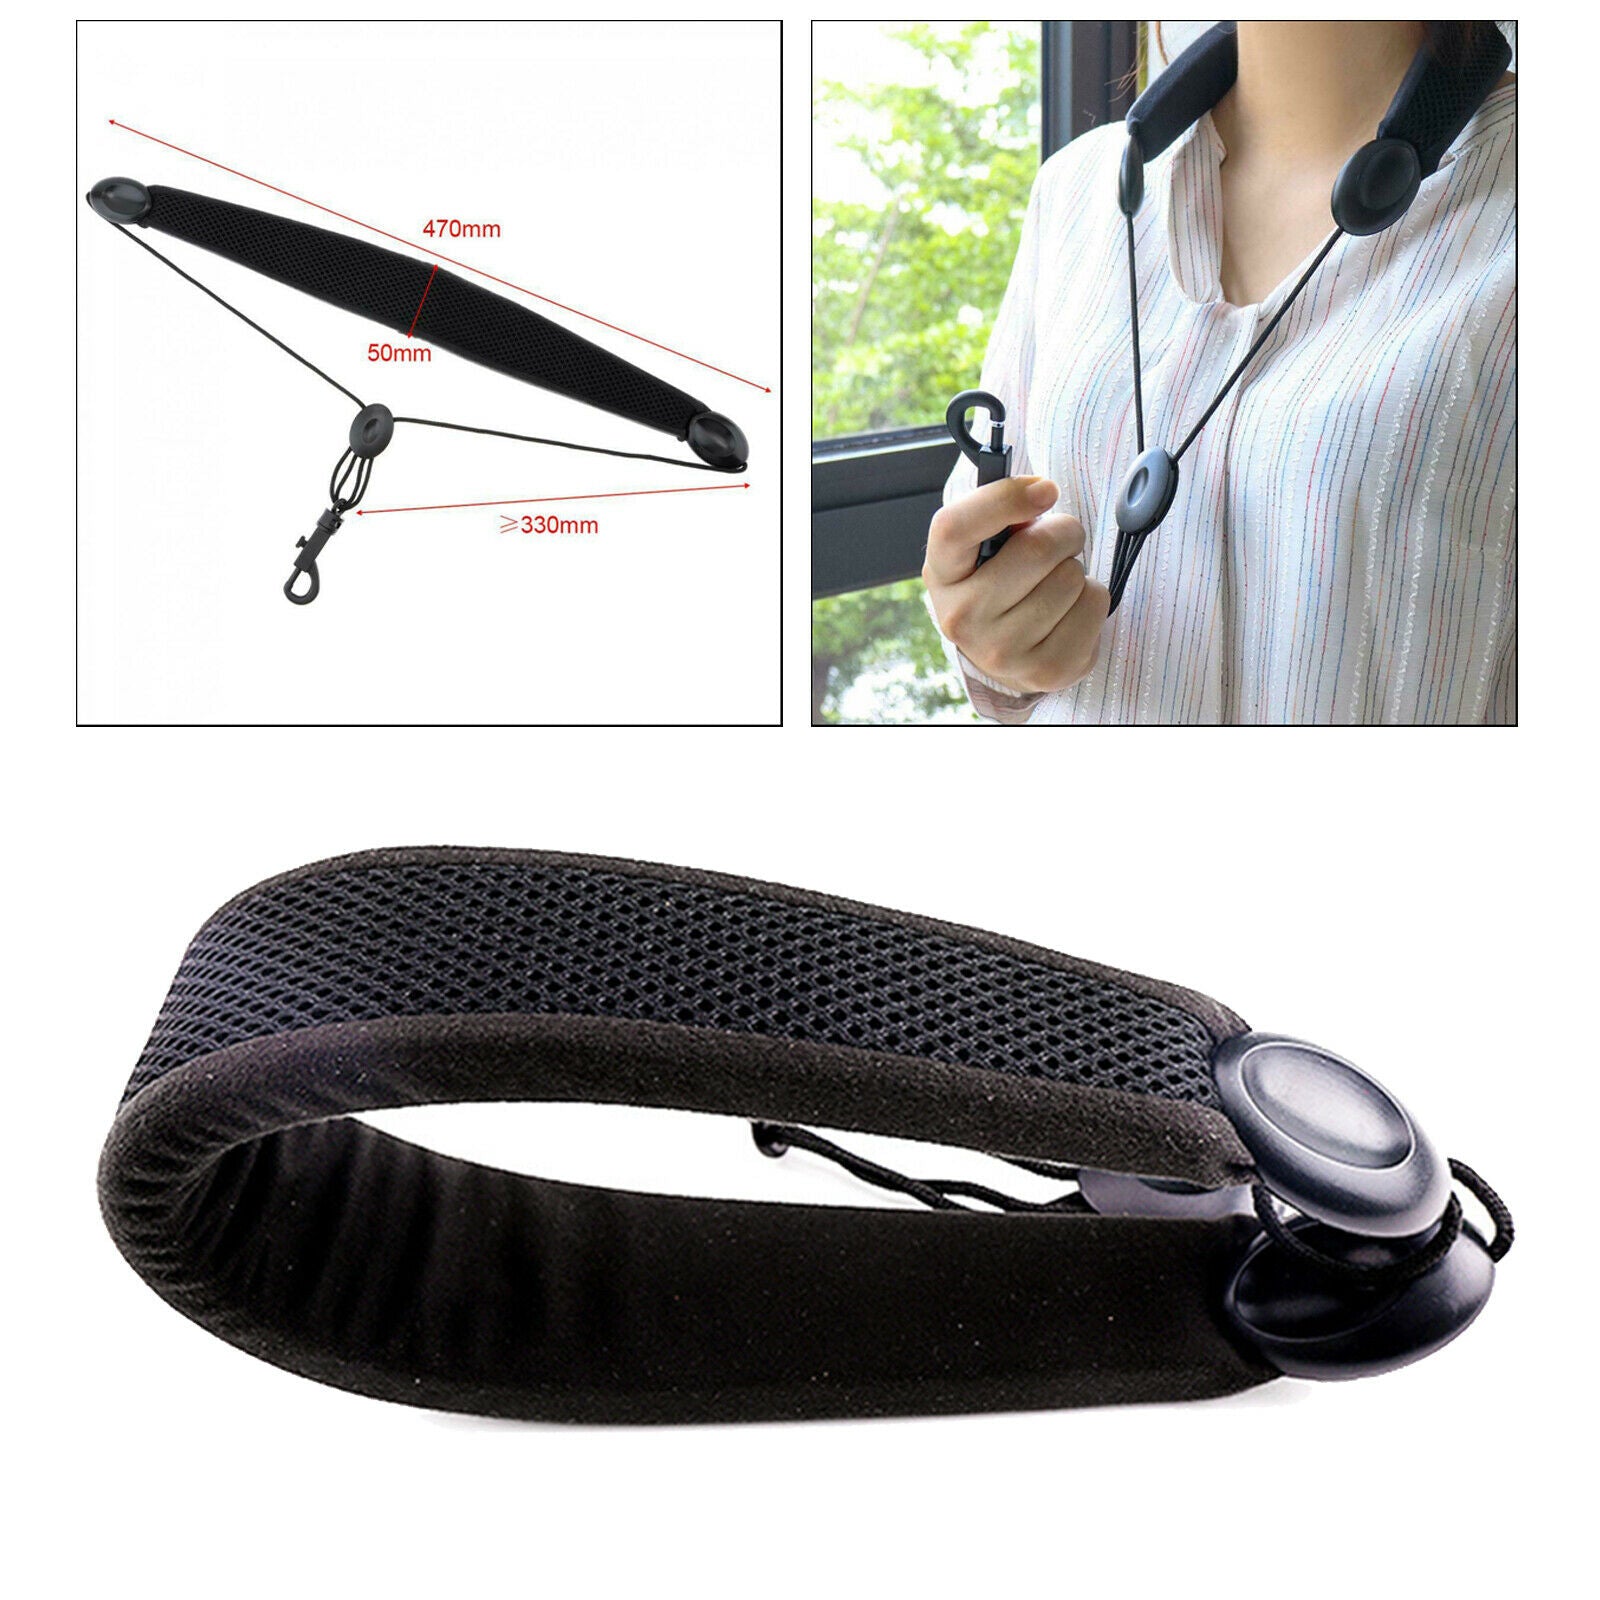 Padded Saxophone Neck Strap-Comfortable Sax Strap Tie with Breathable, Washable,